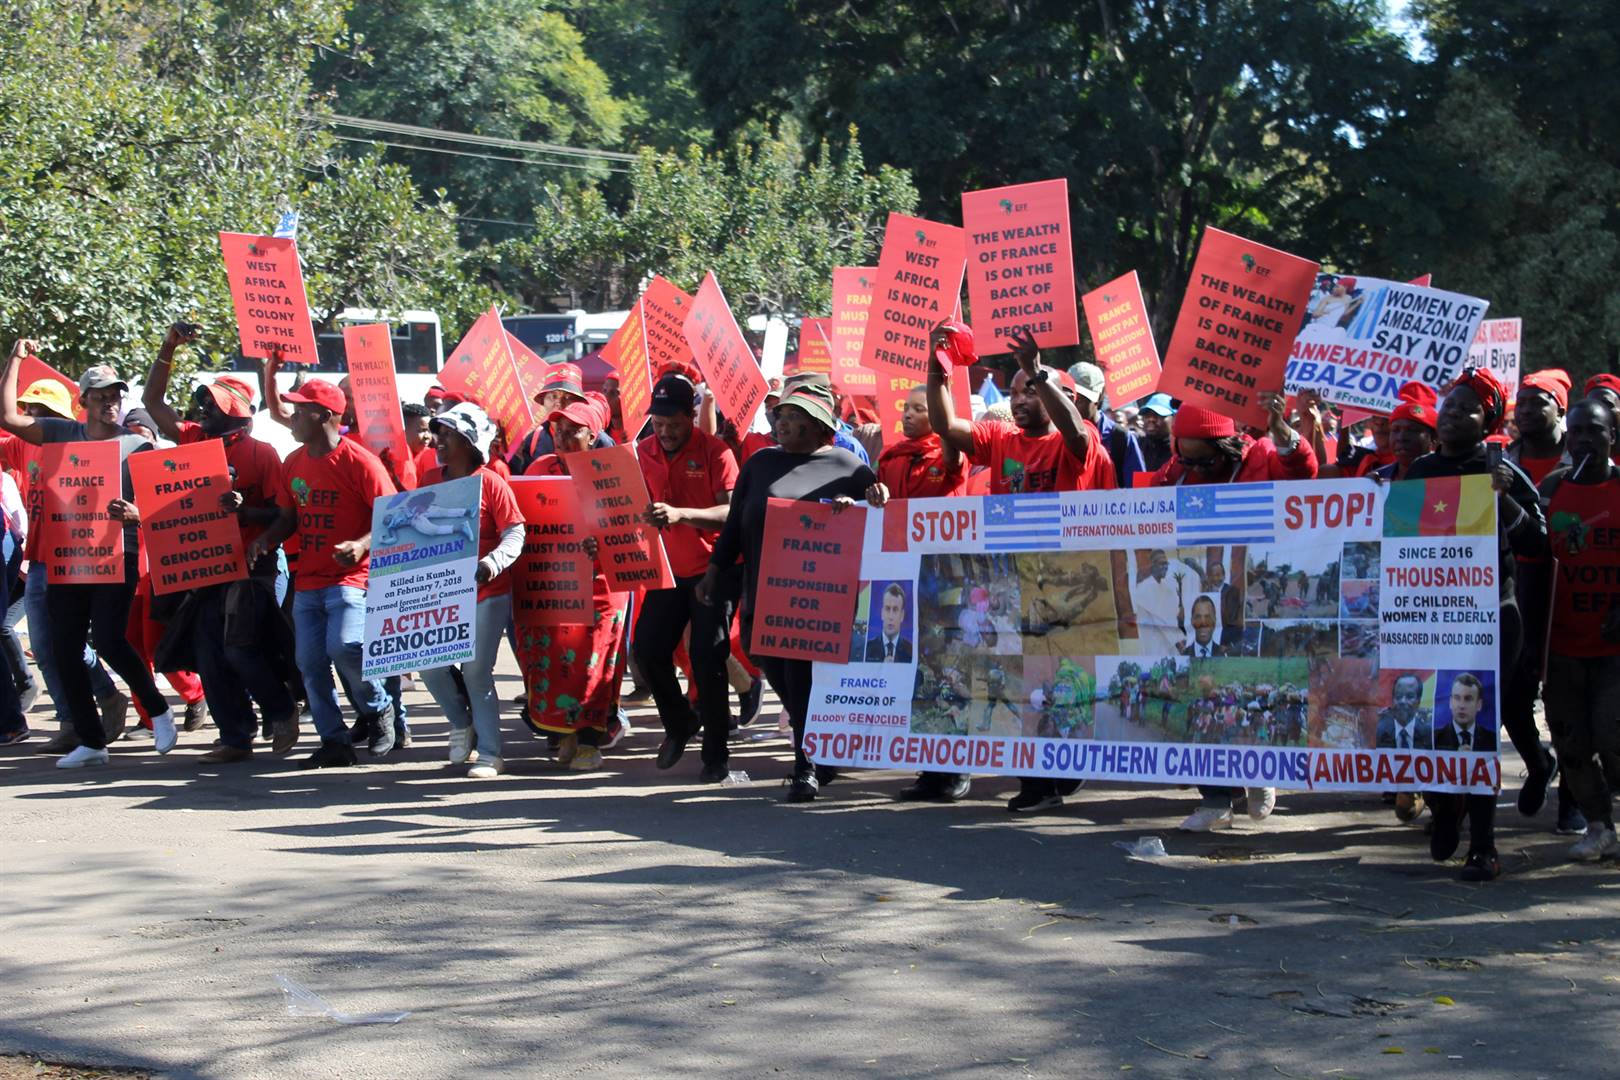 The members and their leadership, including their commander in chief, Julius Malema, marched to the French Embassy in Tshwane. Photo by Thokozile MnguniPhoto by Thokozile Mnguni